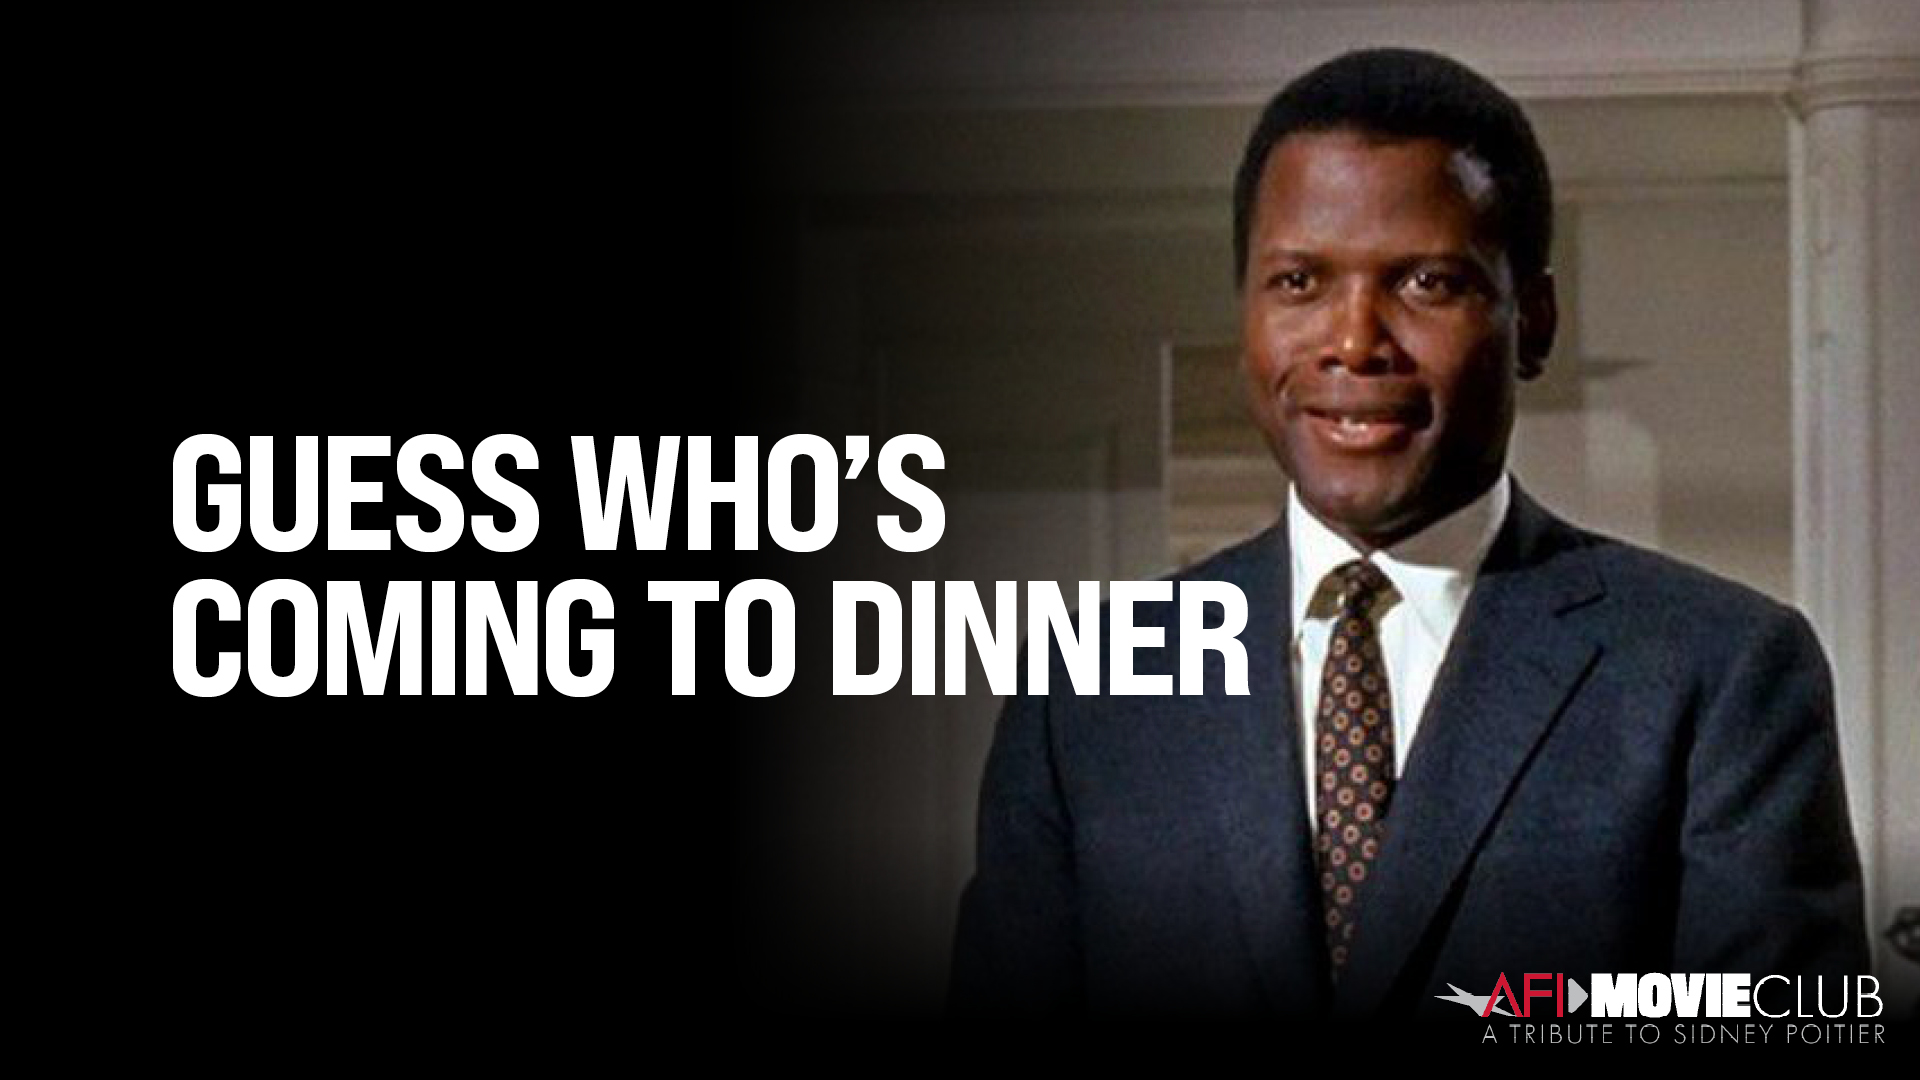 Guess Who's Coming to Dinner Film Still - Sidney Poitier